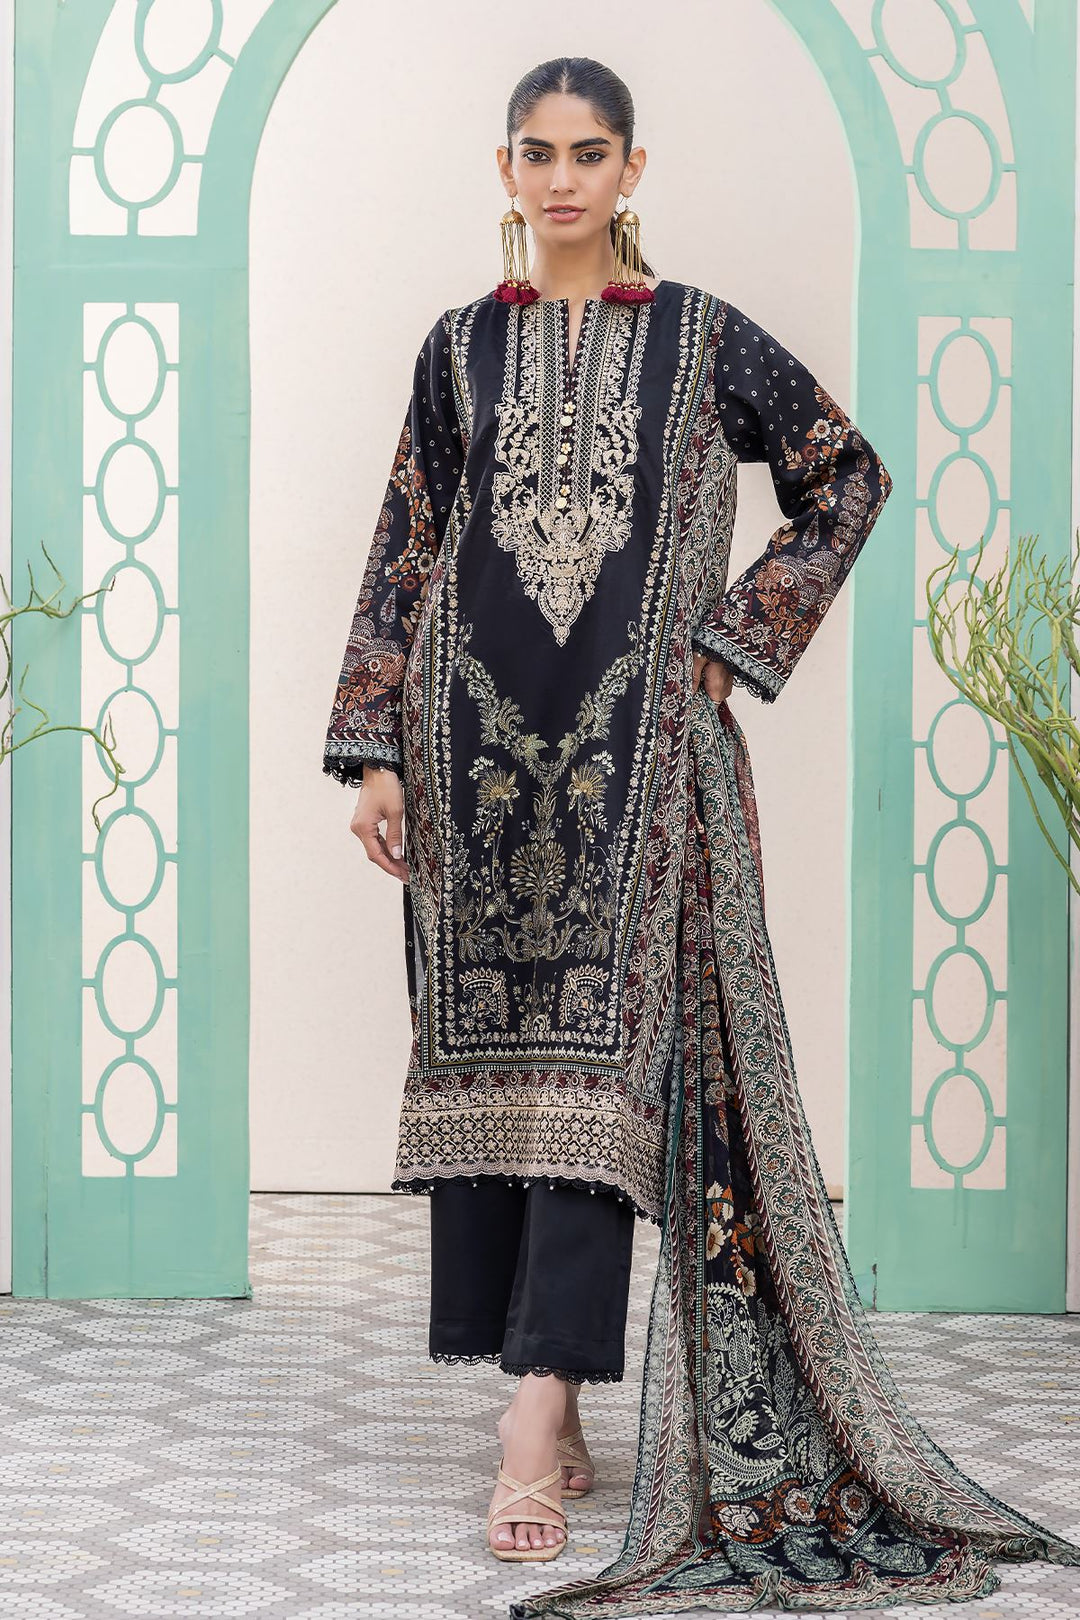 pakistani formal clothes a woman in a black and red dress standing in front of a wall